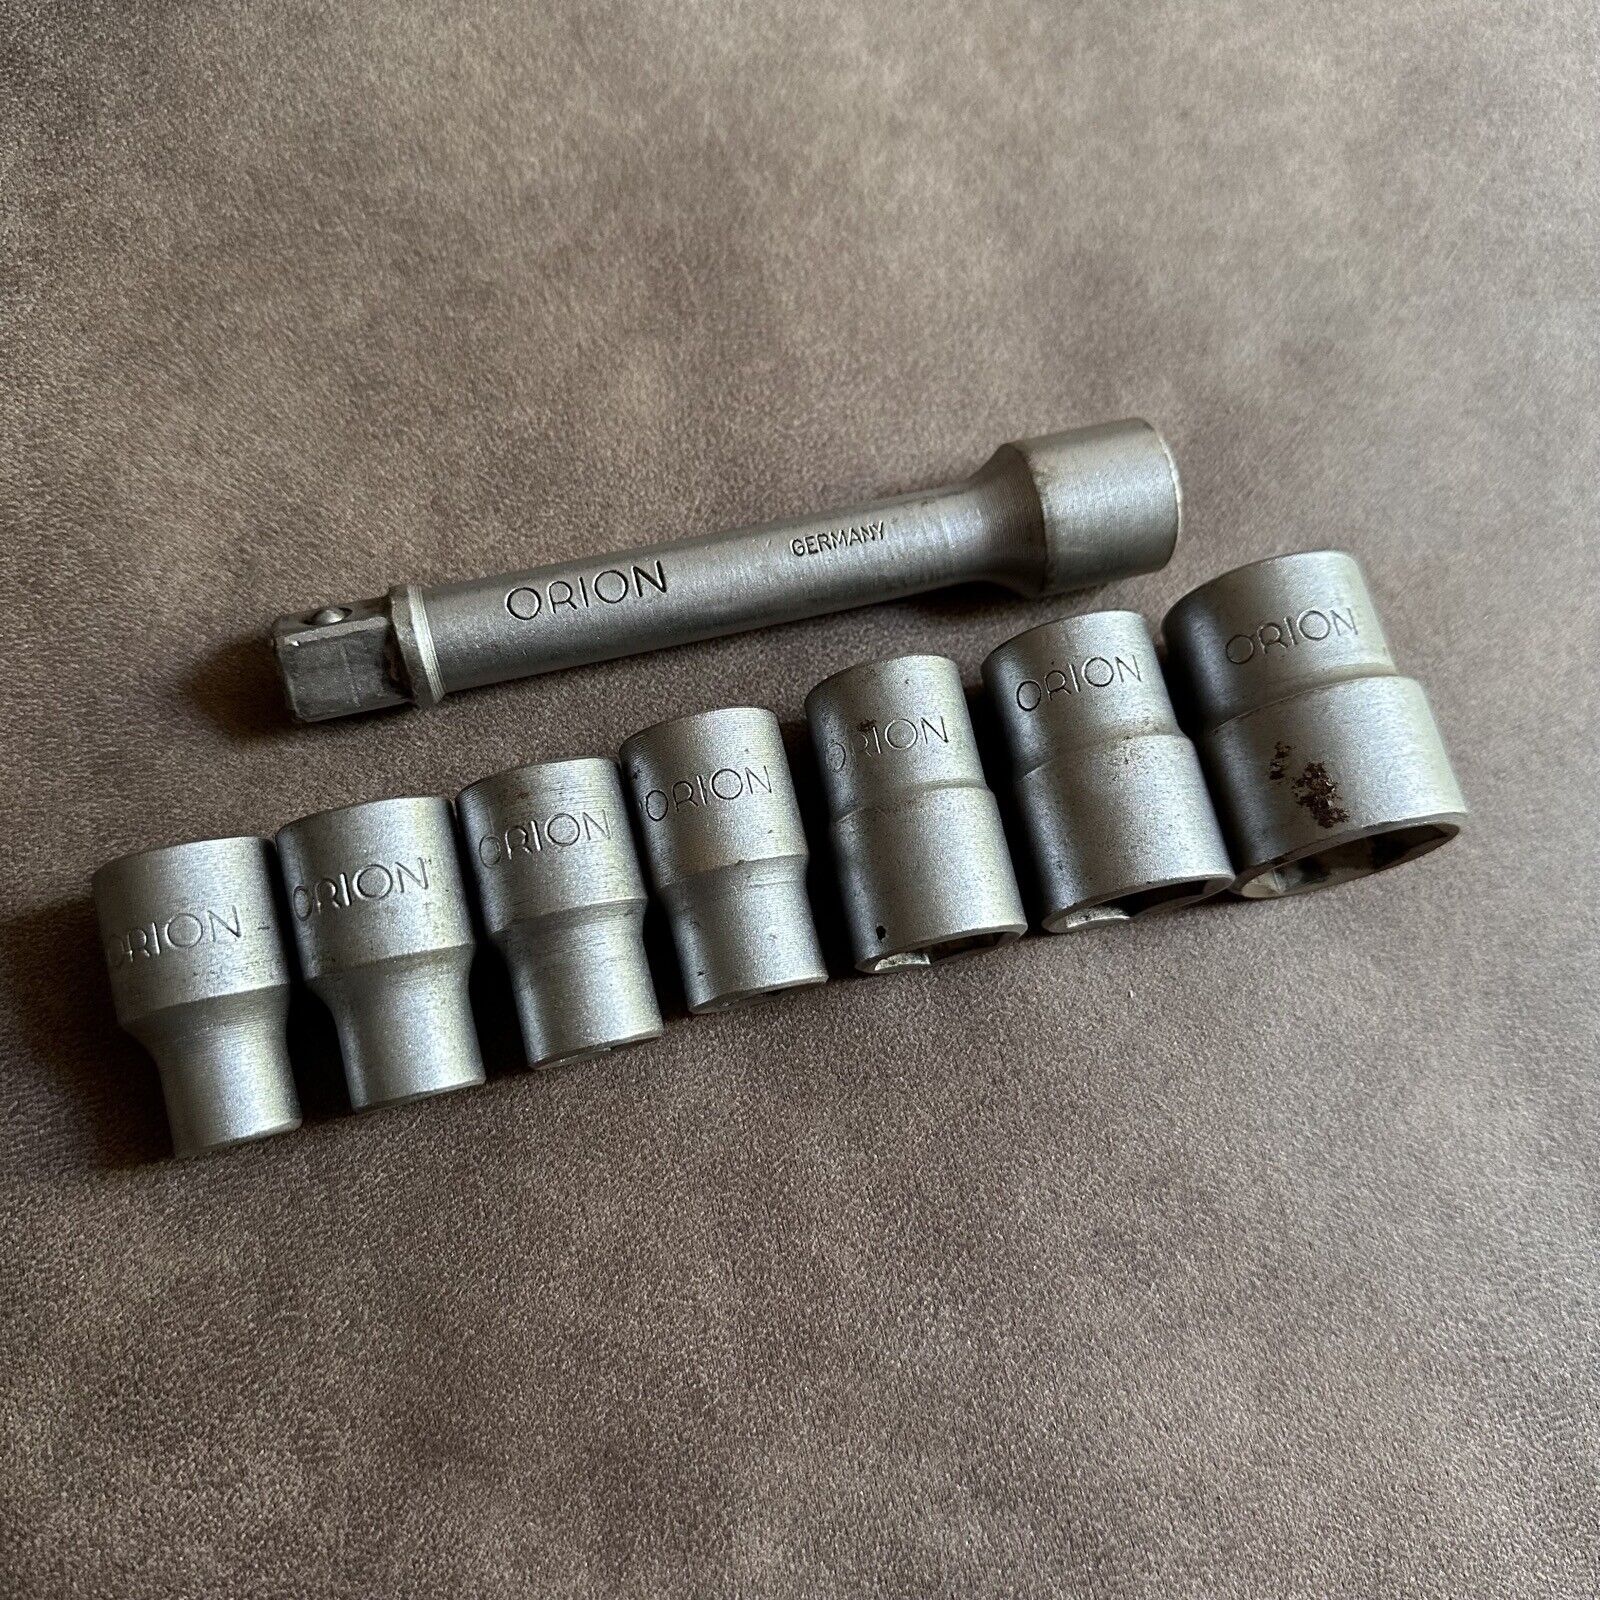 7x VINTAGE ORION METRIC HEX 6 POINT SOCKETS & 5